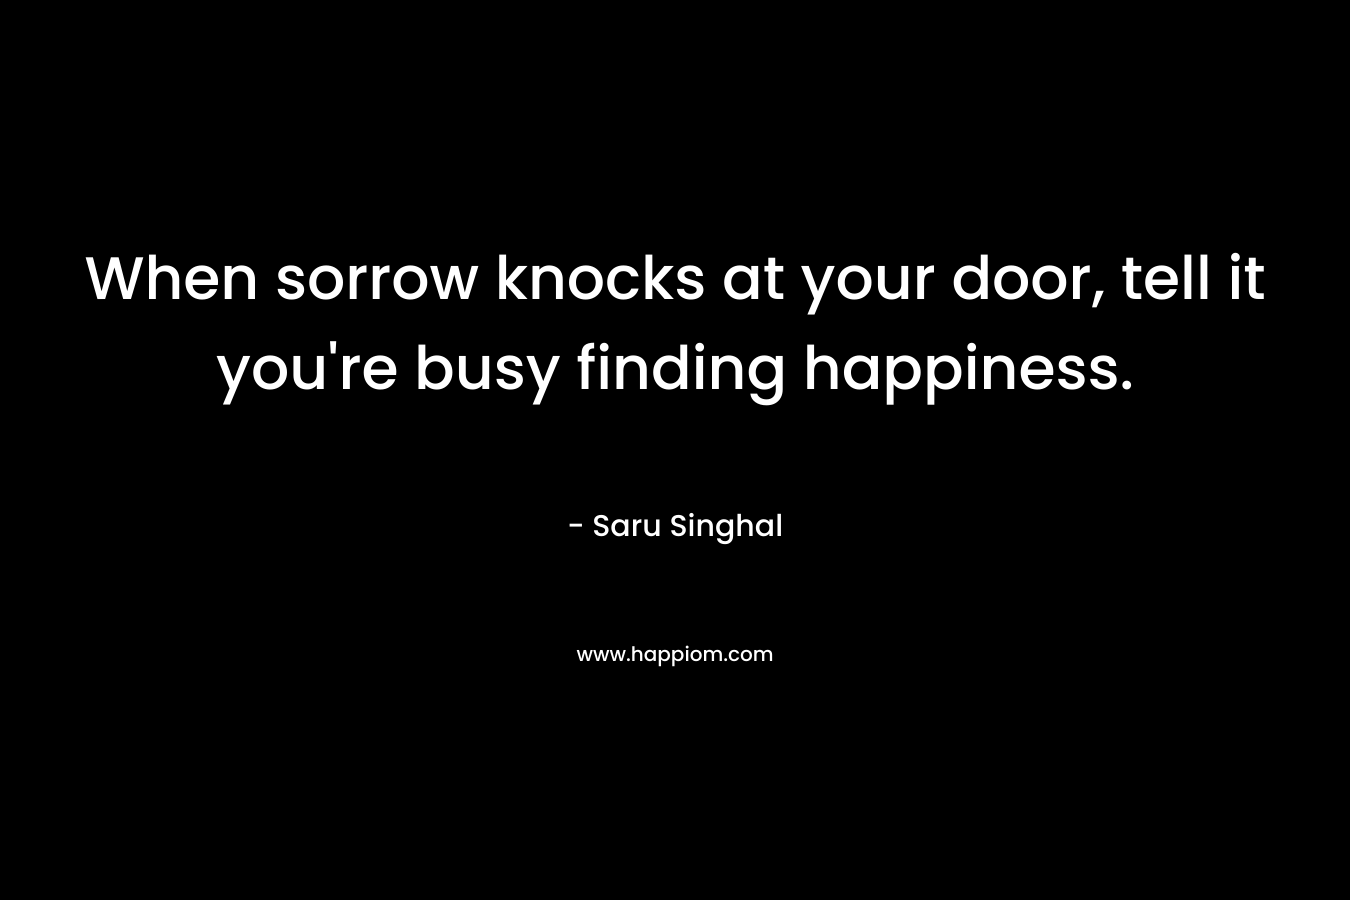 When sorrow knocks at your door, tell it you’re busy finding happiness. – Saru Singhal